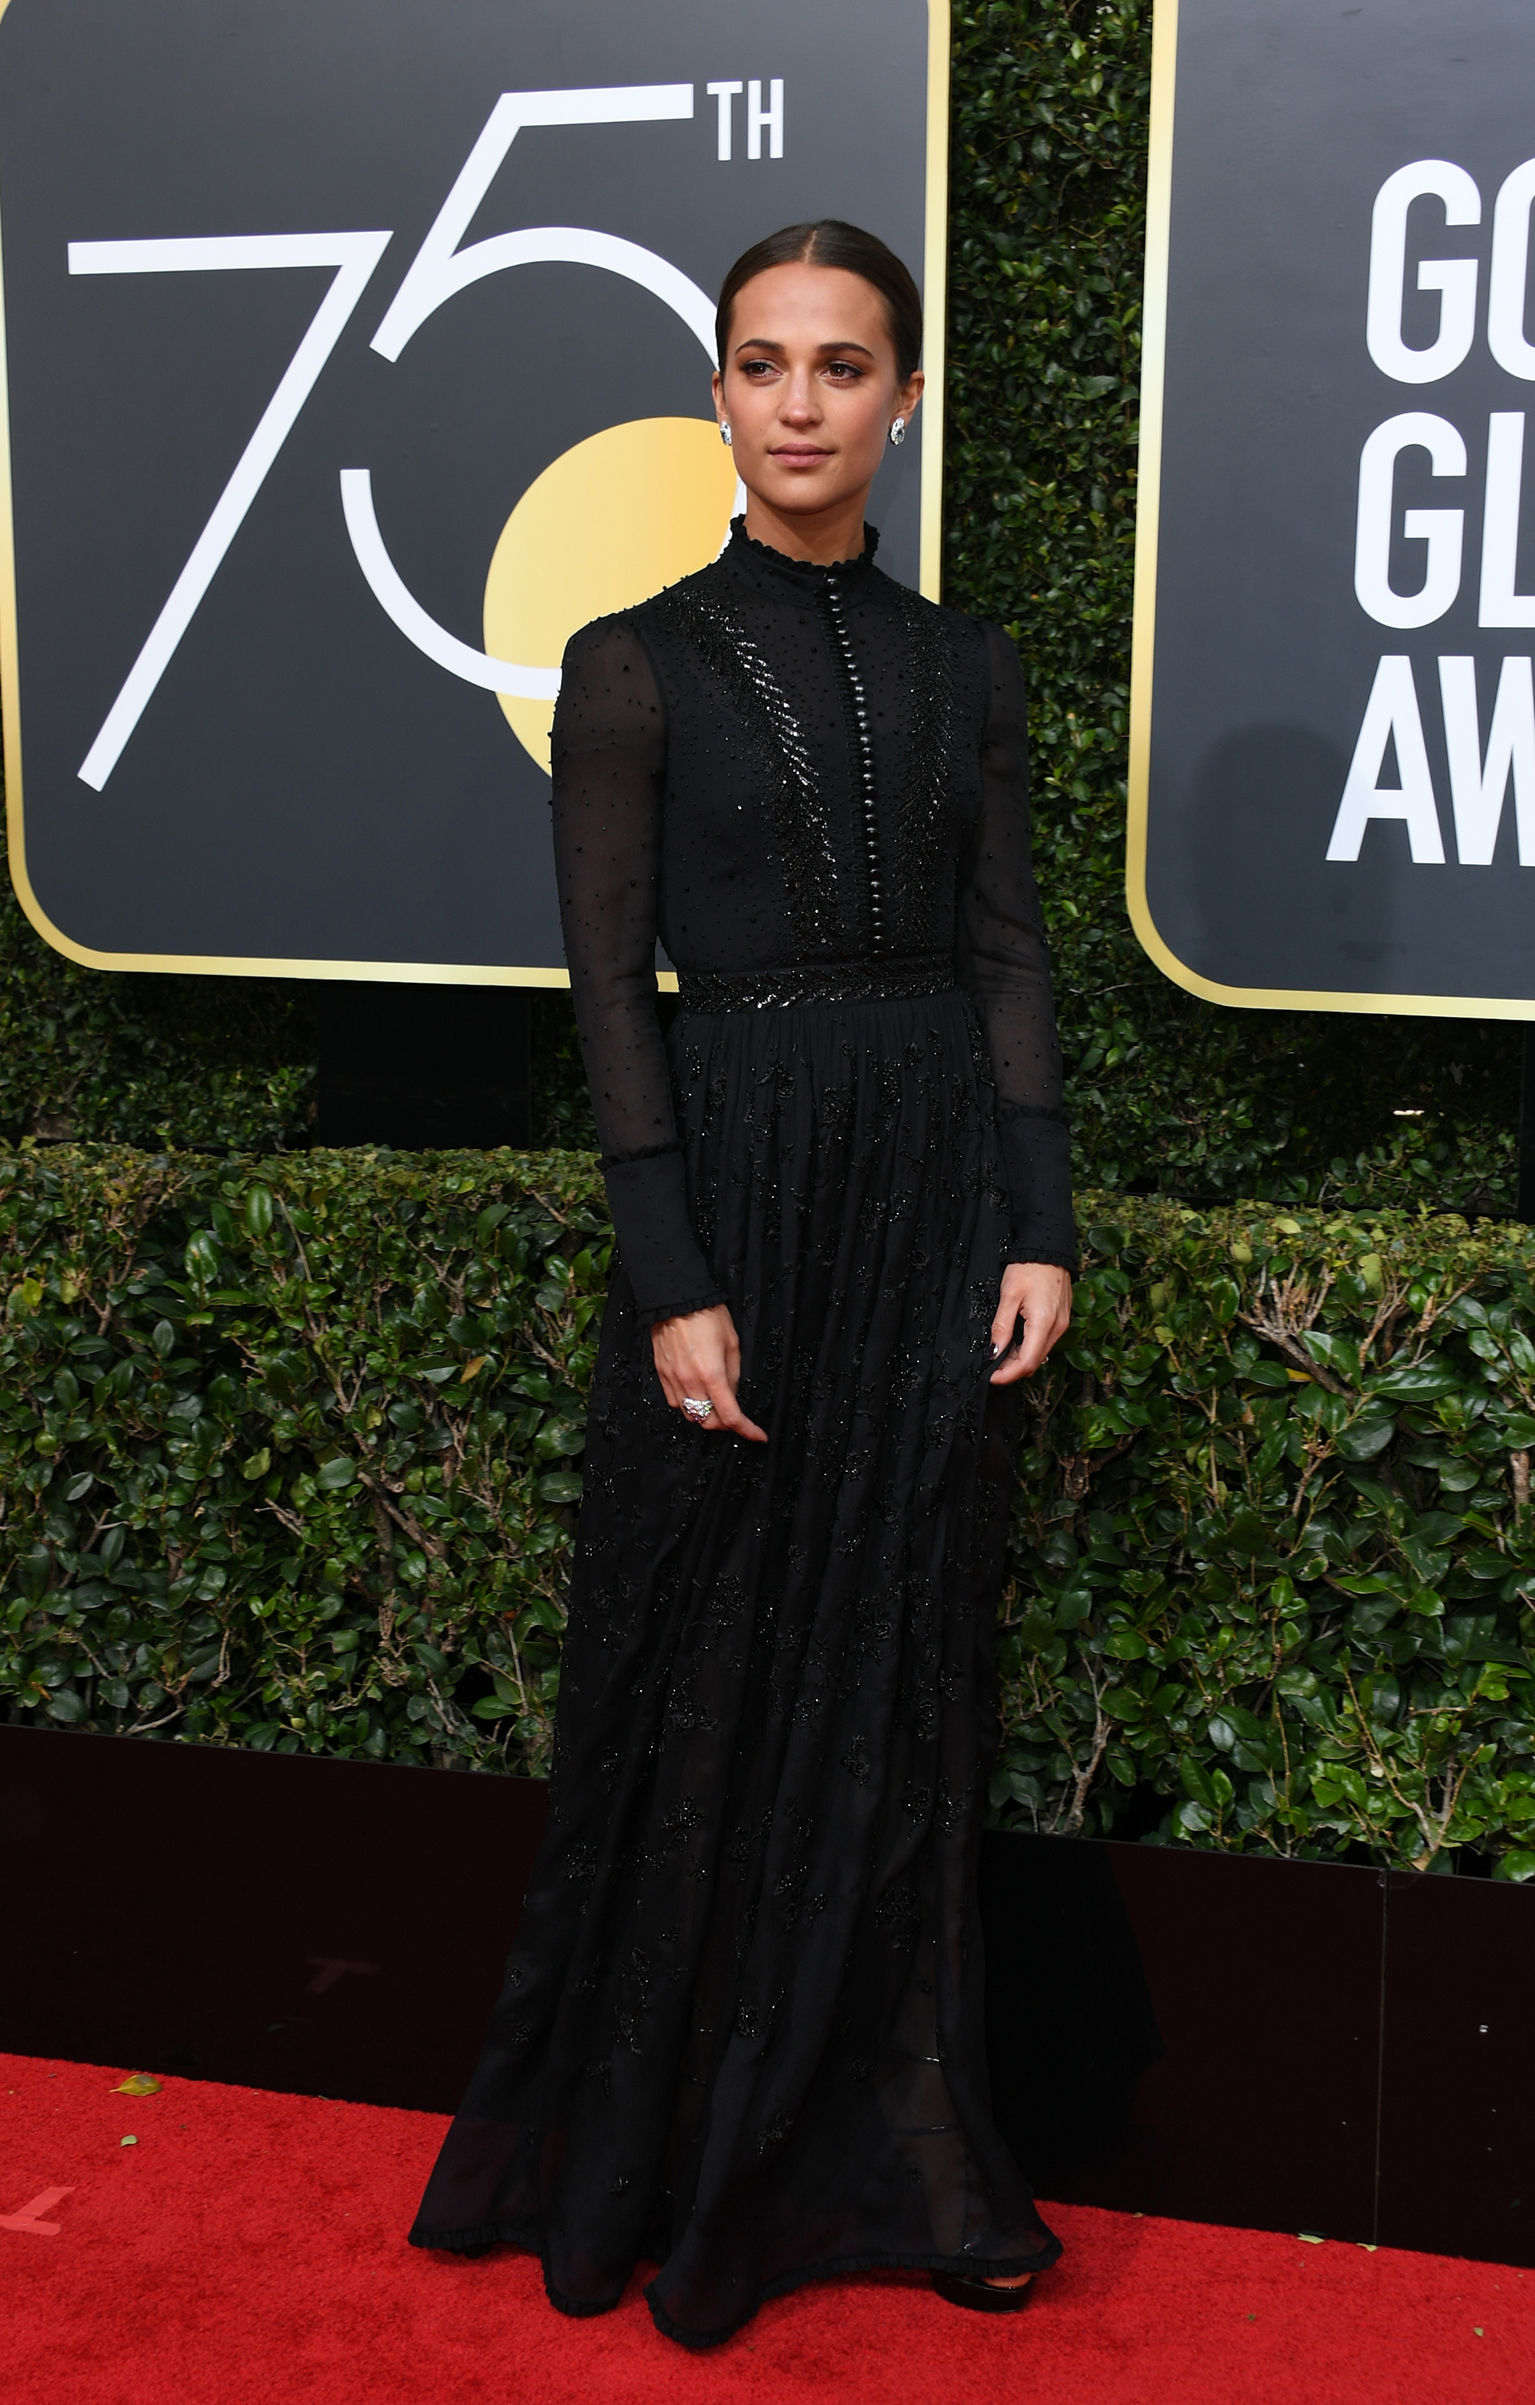 Swedish actress Alicia Vikander arrives for the 75th Golden Globe Awards on January 7, 2018, in Beverly Hills, California.